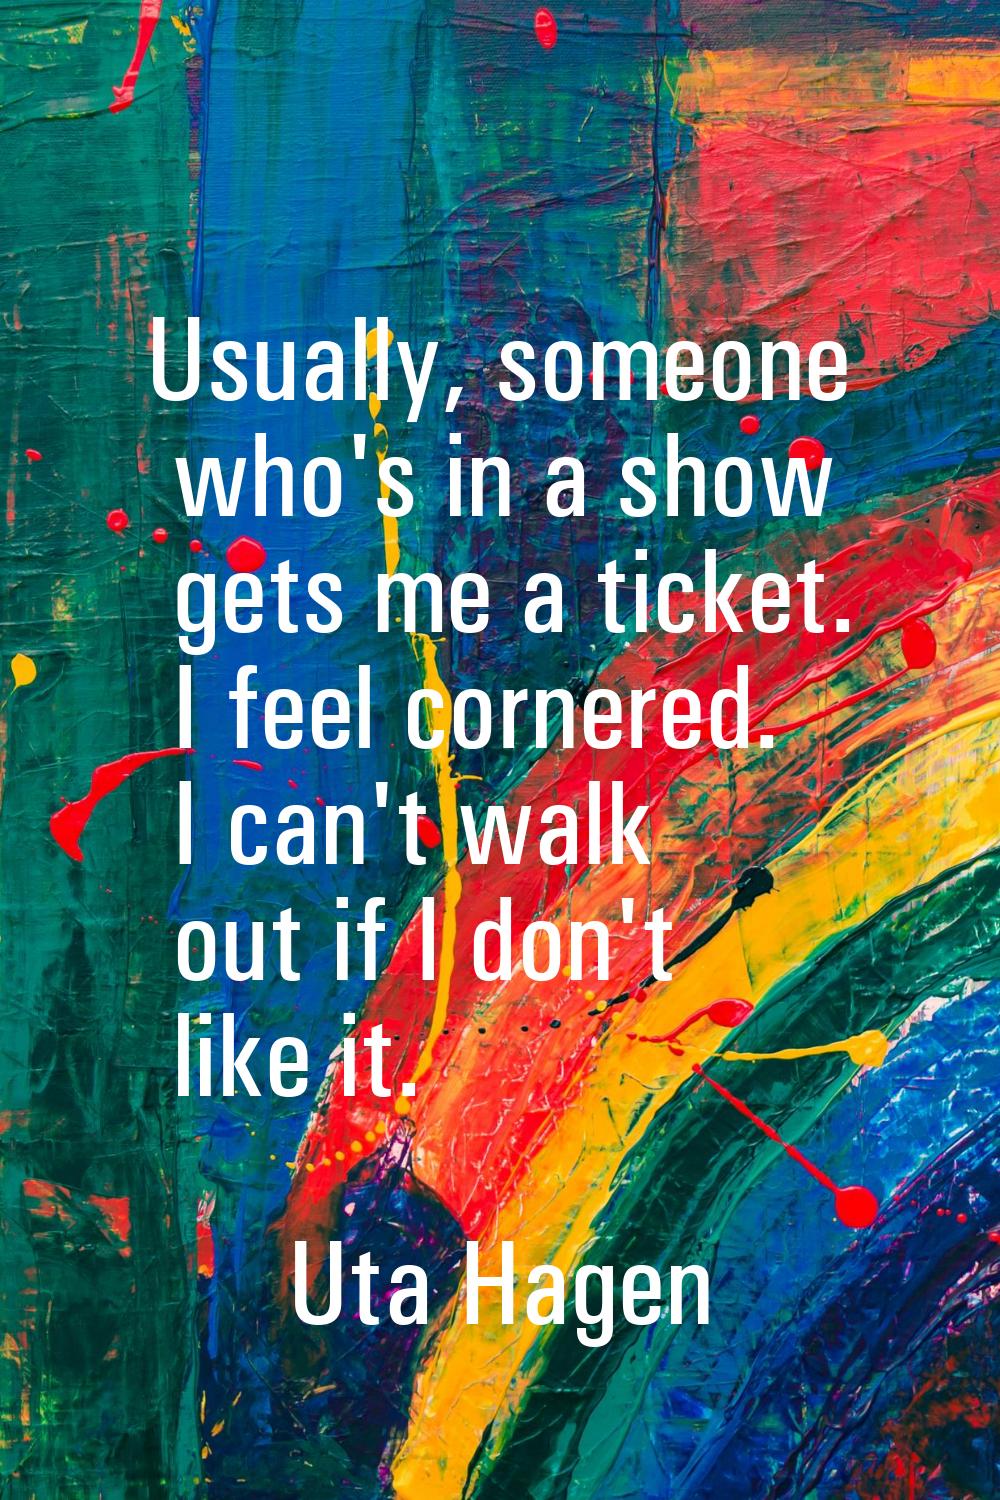 Usually, someone who's in a show gets me a ticket. I feel cornered. I can't walk out if I don't lik